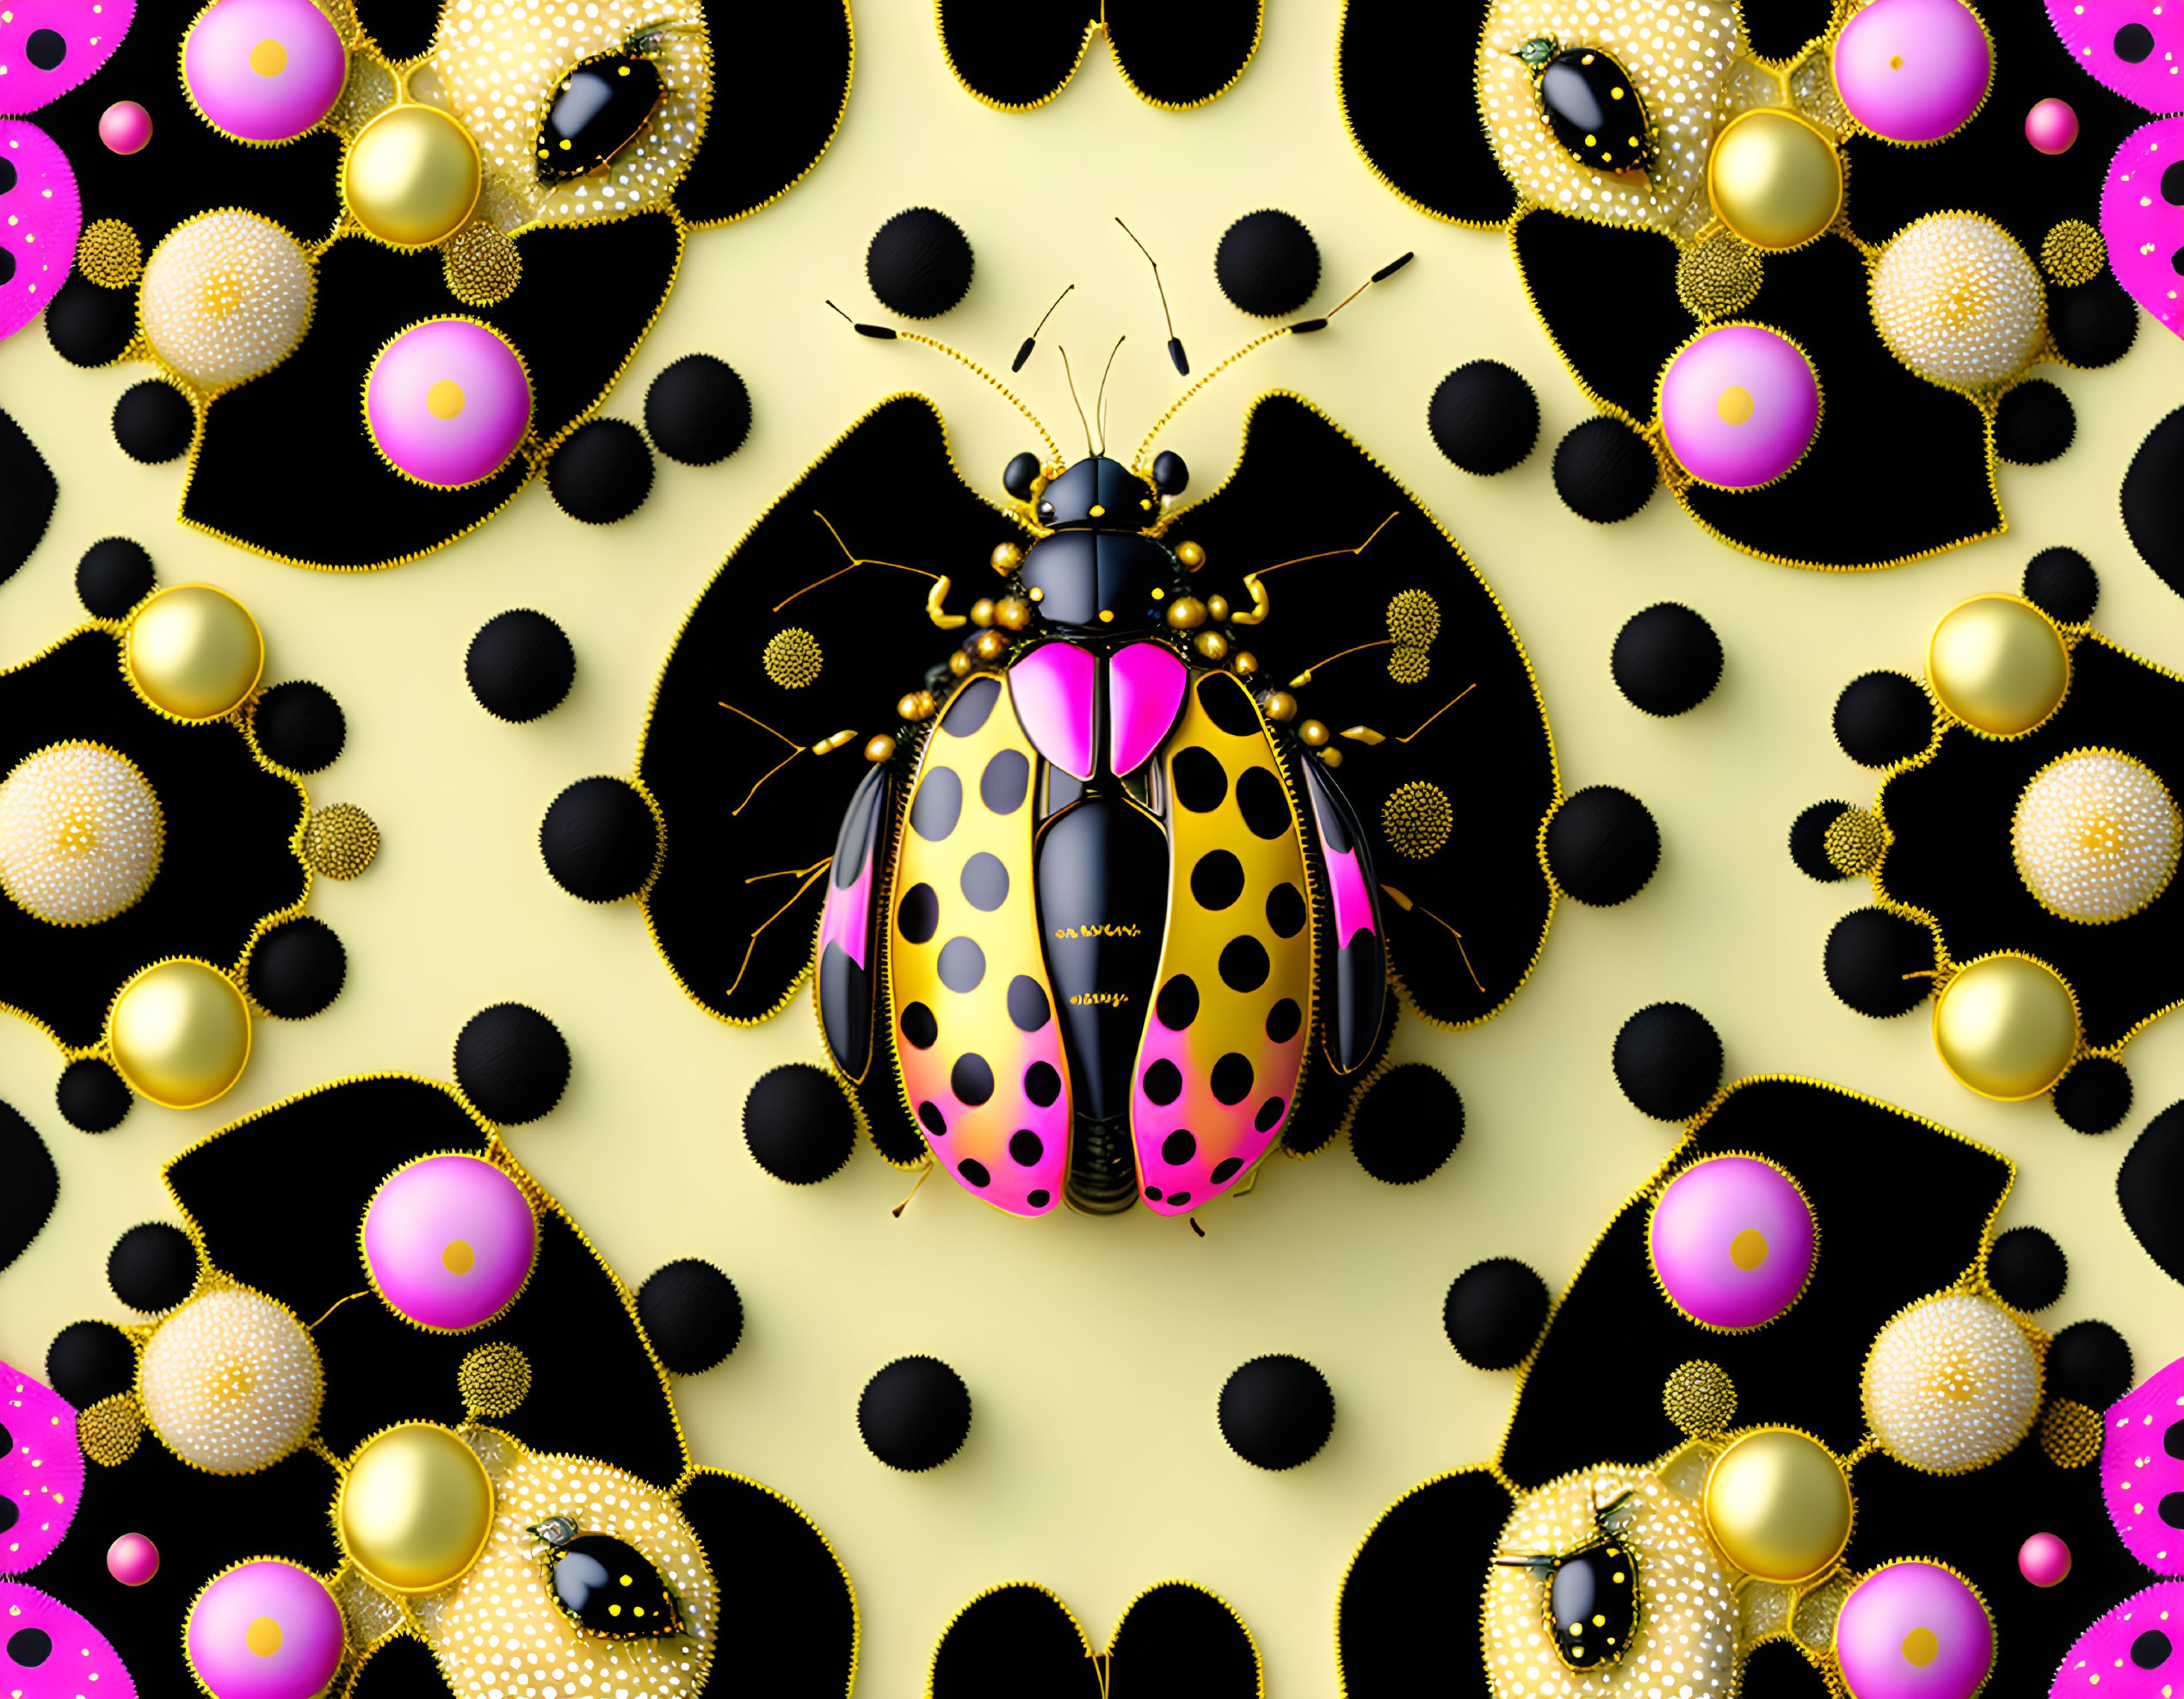 Vibrant digital illustration: patterned beetle with black, gold, and pink spots on yellow background